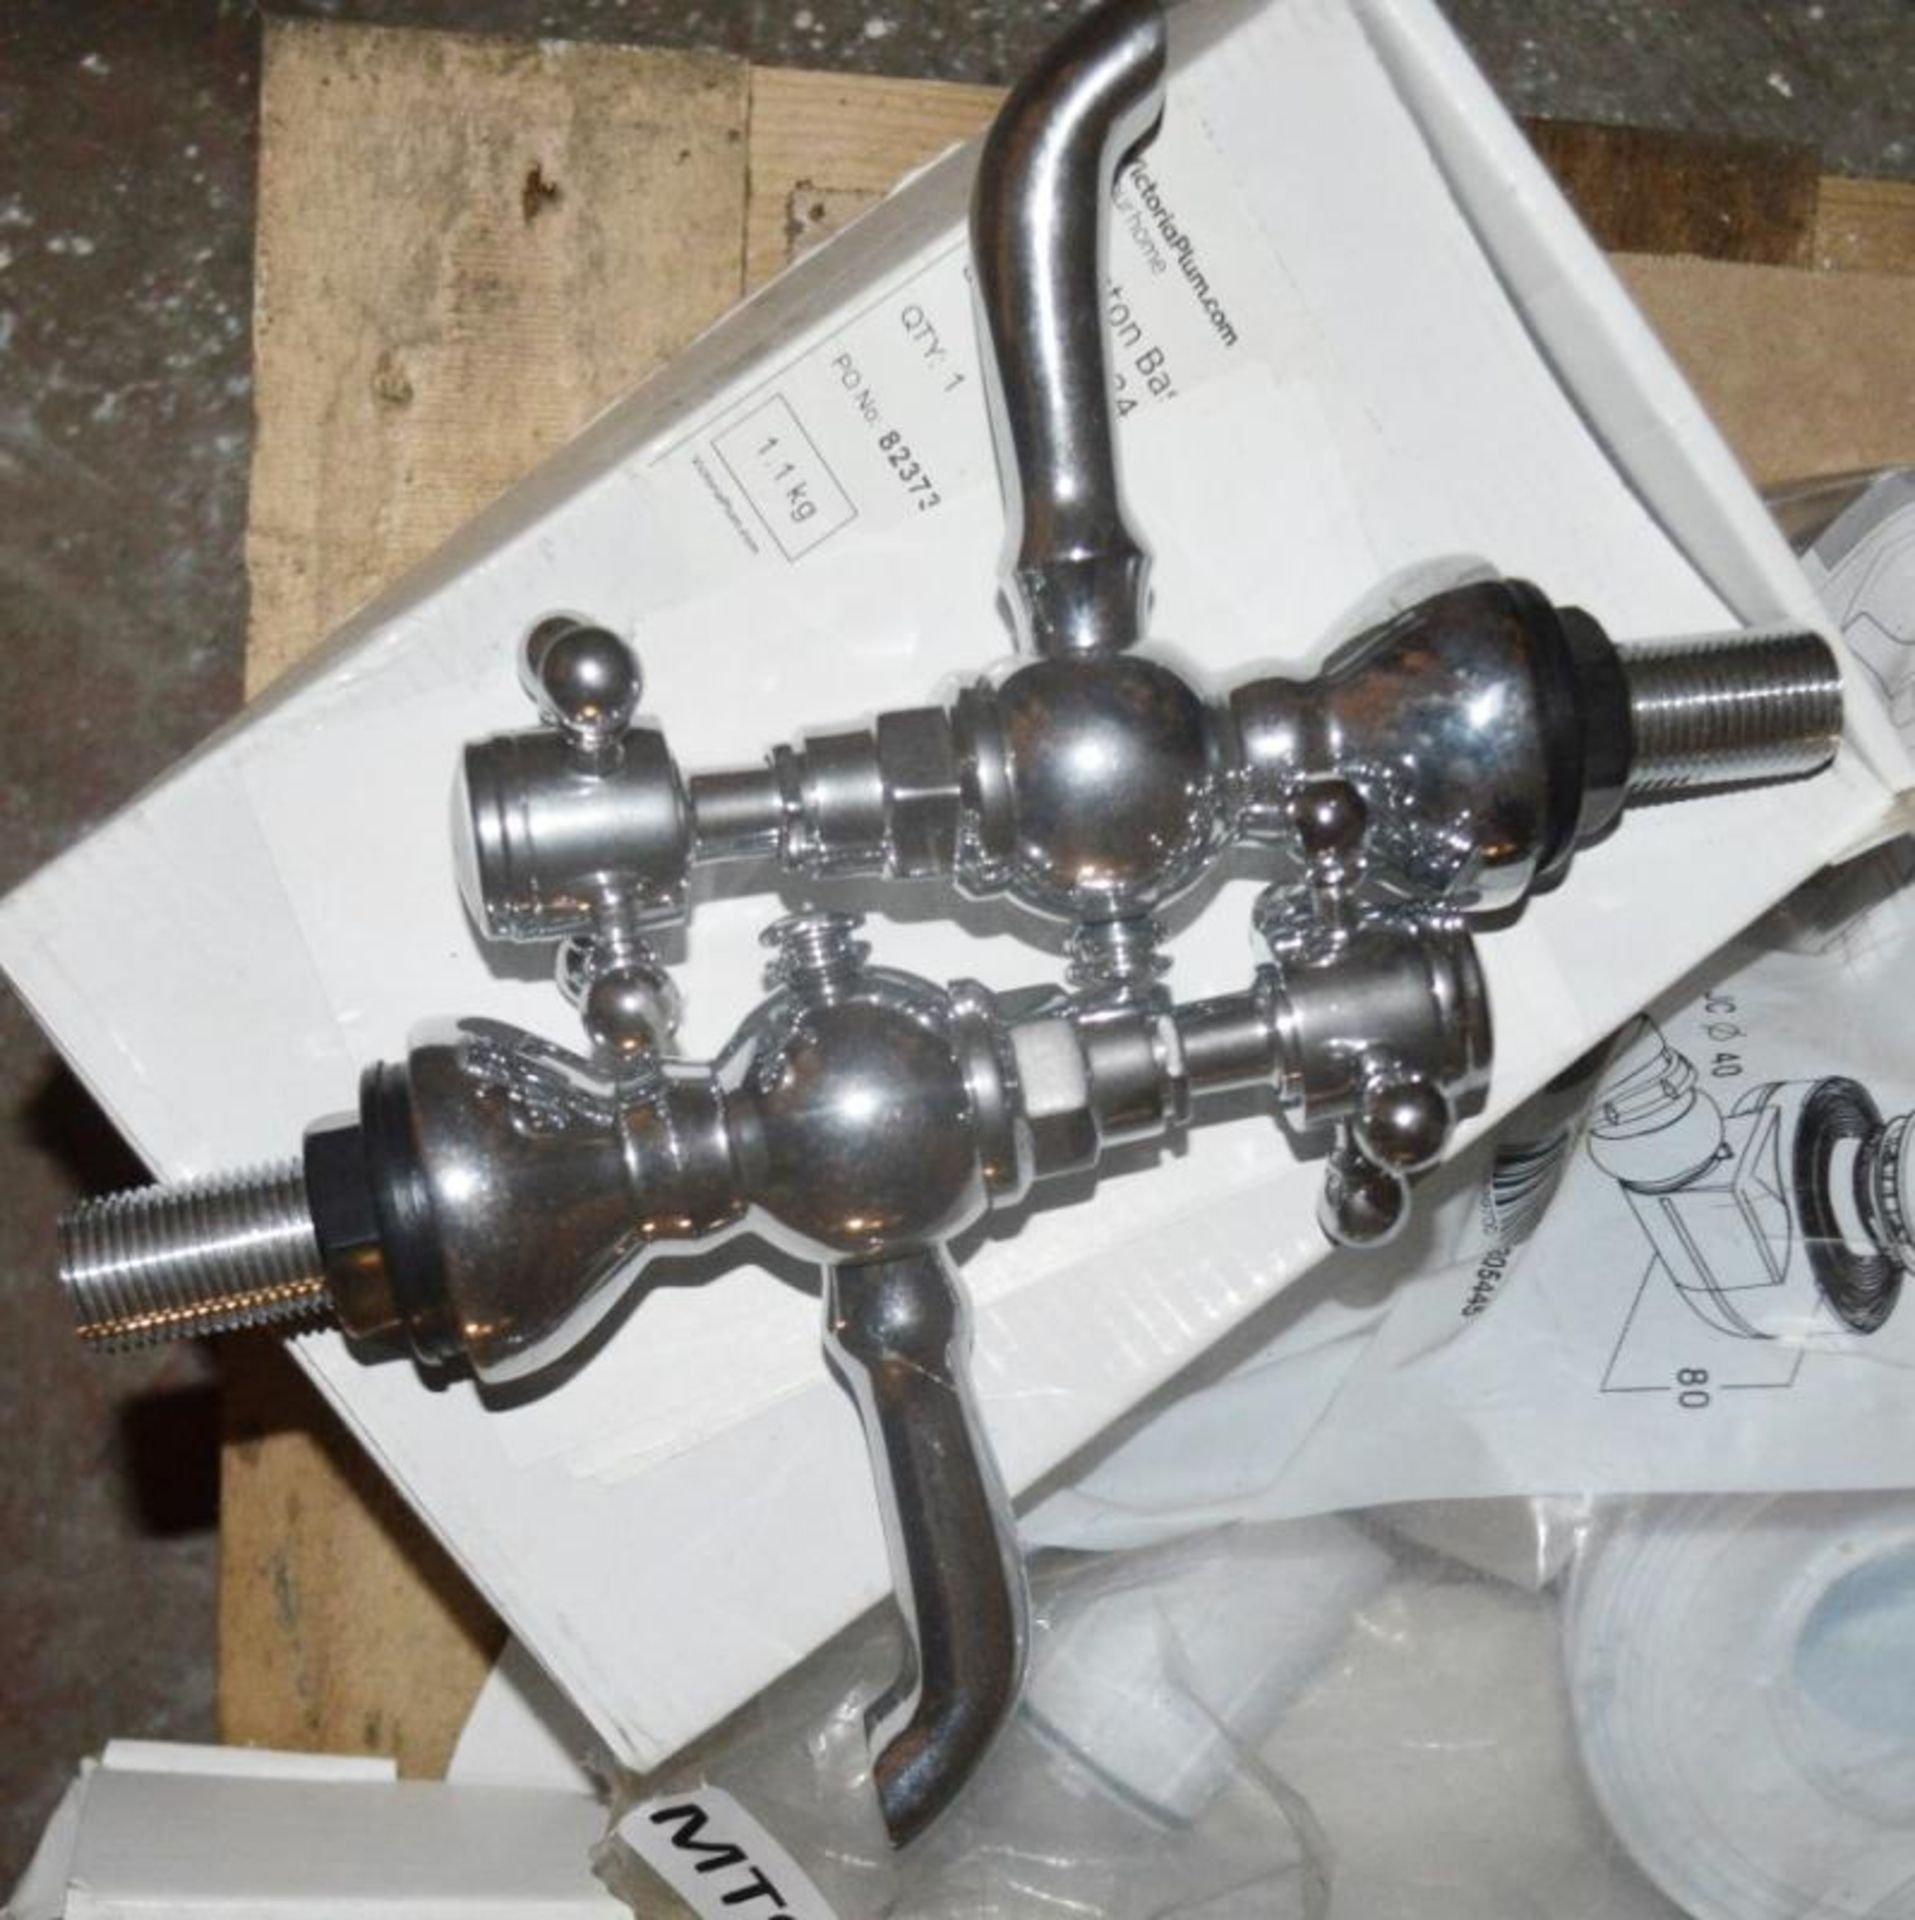 Approx 15 x Assorted Items Of Bathroom Brassware And Accessories - Brand New Boxed Stock - CL269 - L - Image 9 of 11